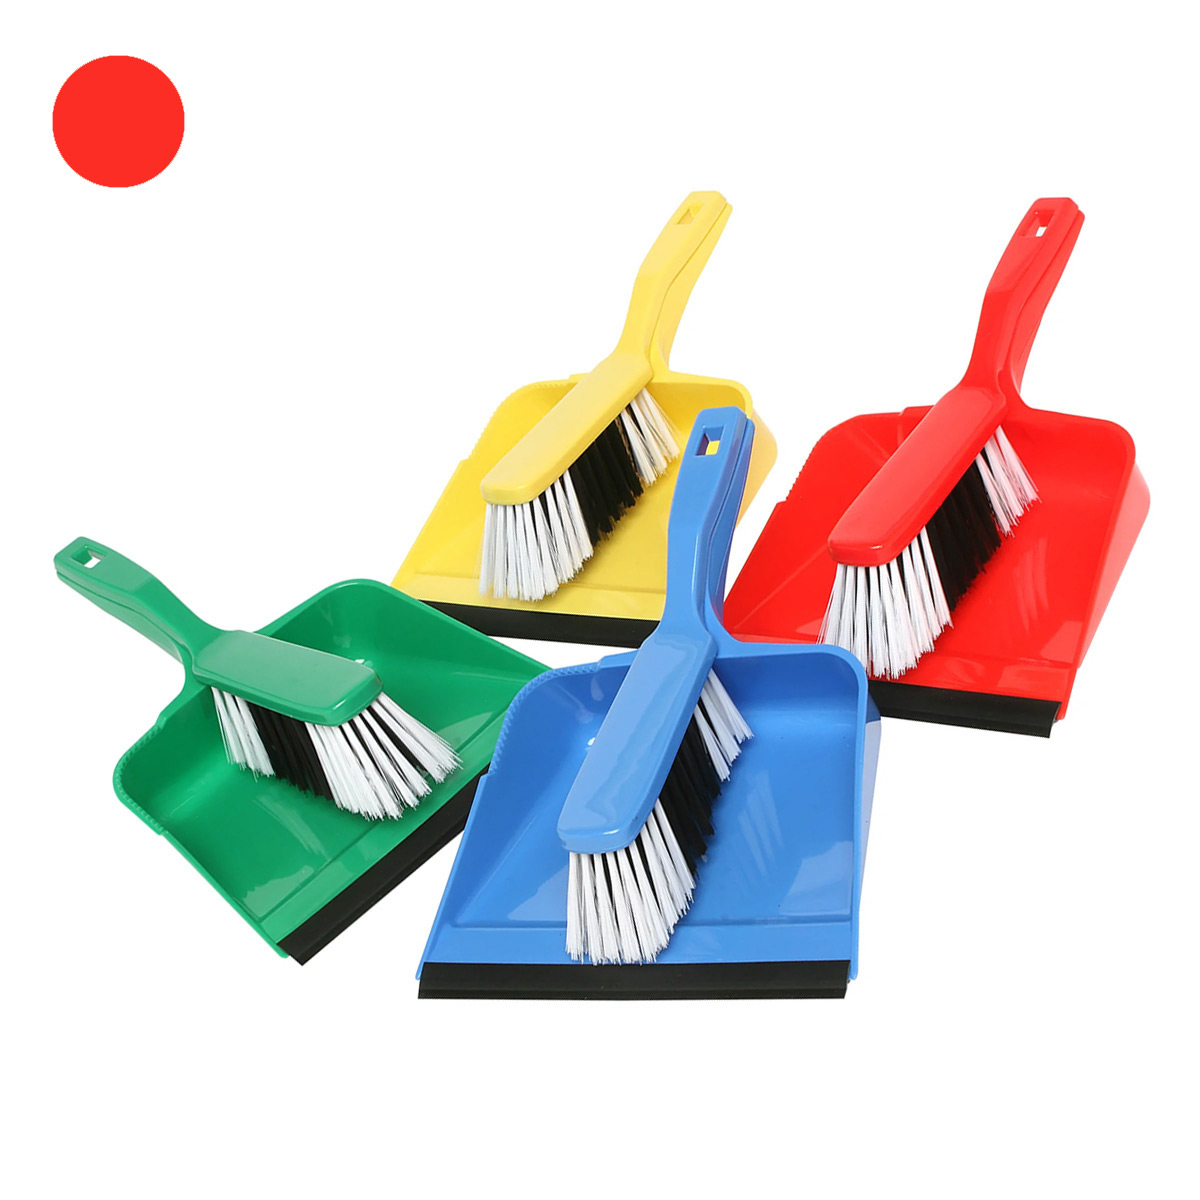 cleaning-equipment-brushware-edco-brush-pan-set-red-commercial-and-domestic-applications-rubber-surface-contour-strip-for-grit-pick-up-vjs-distributors-ED19125